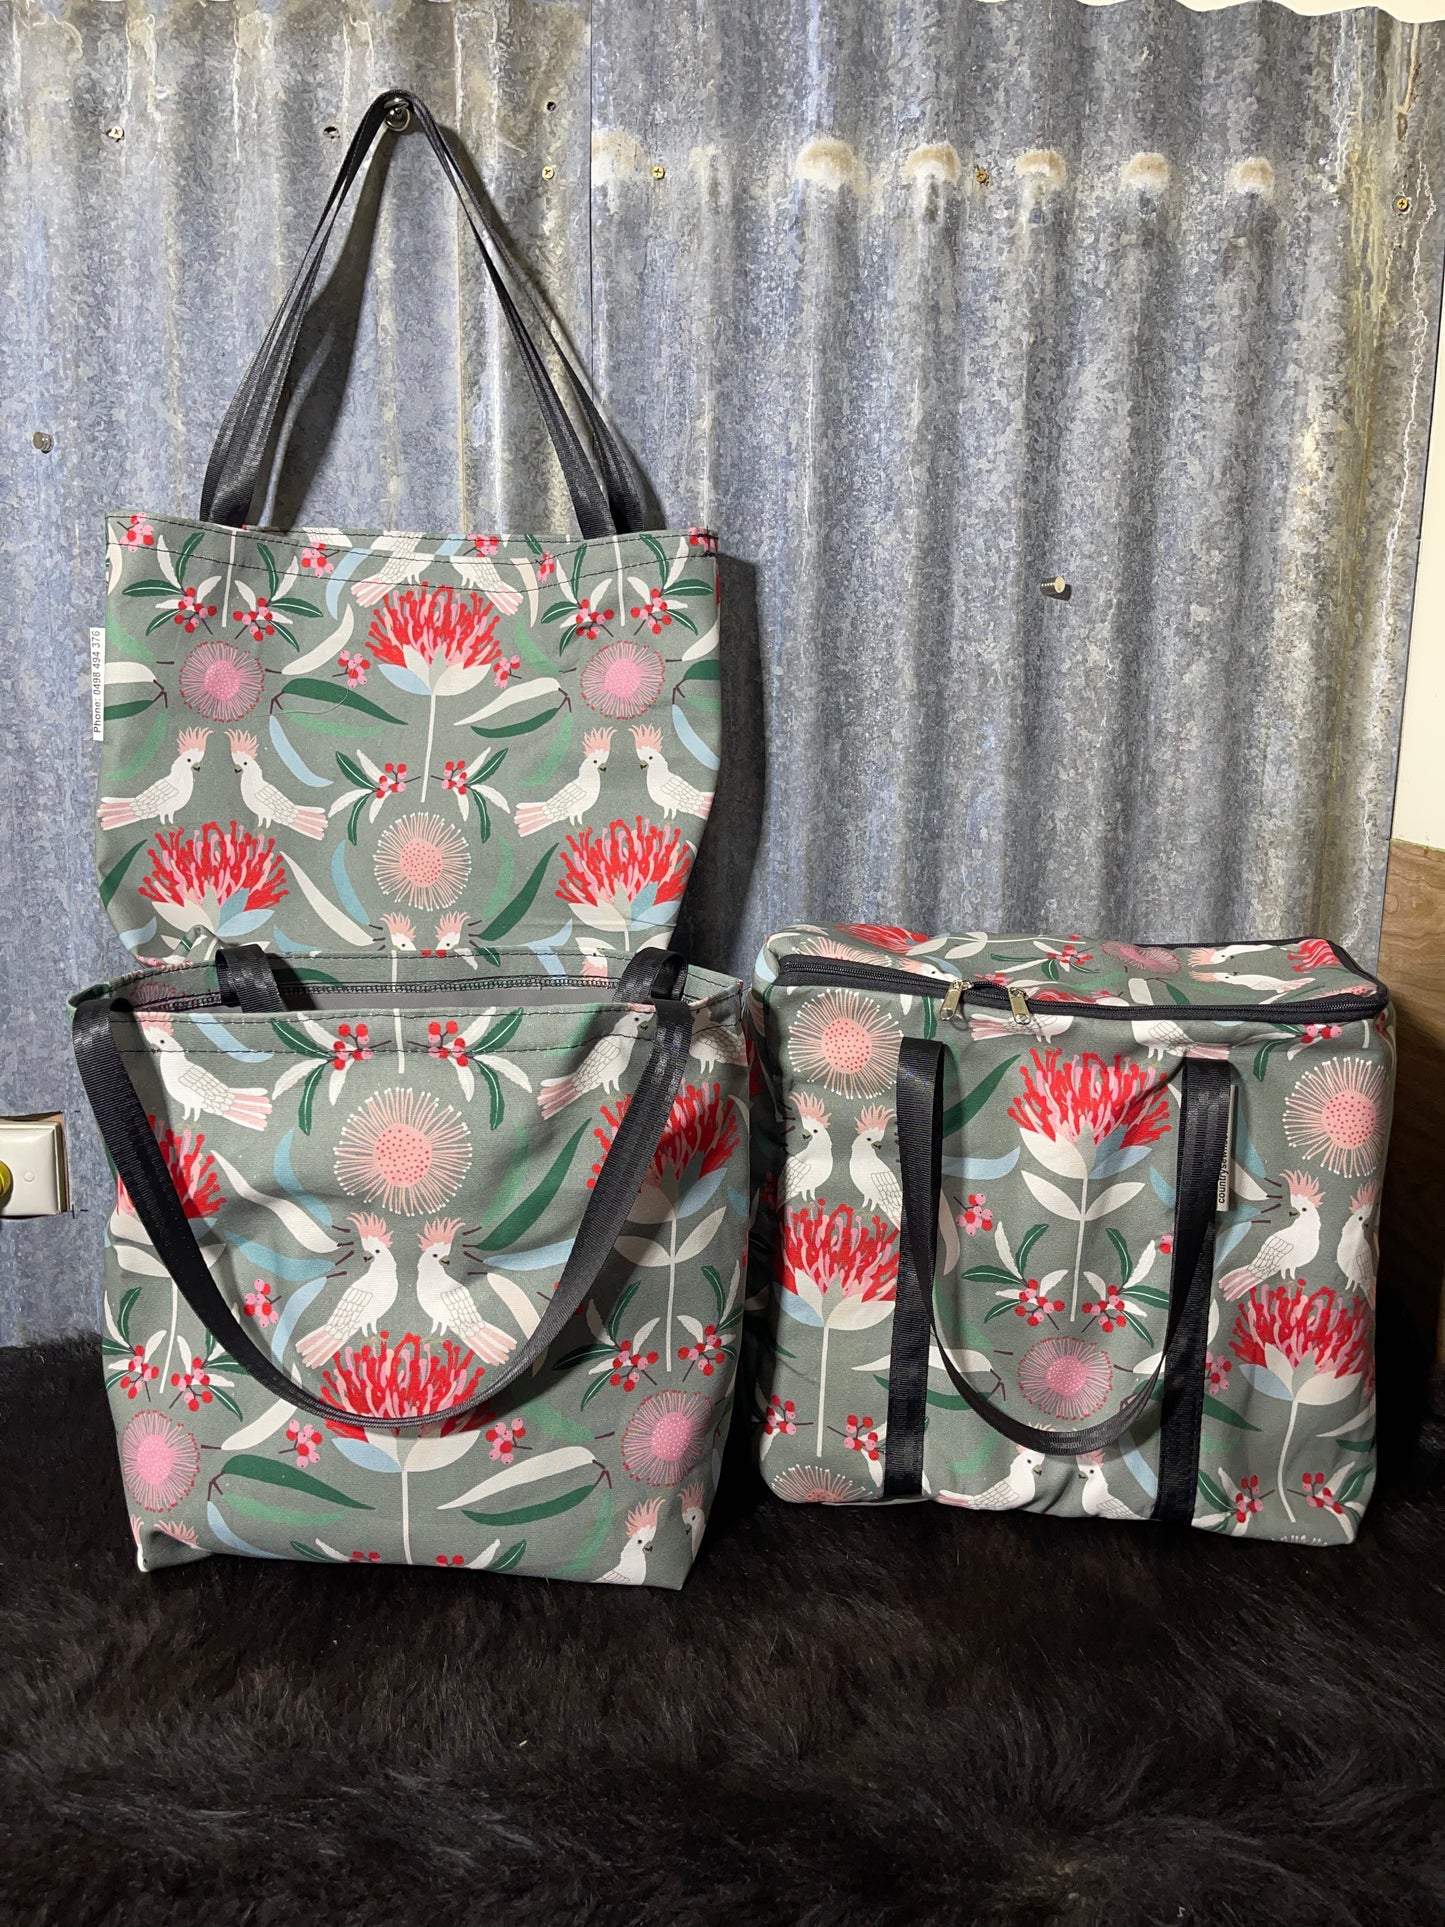 Ready made Shopping Bag Set (insulated cooler bag)- cockys